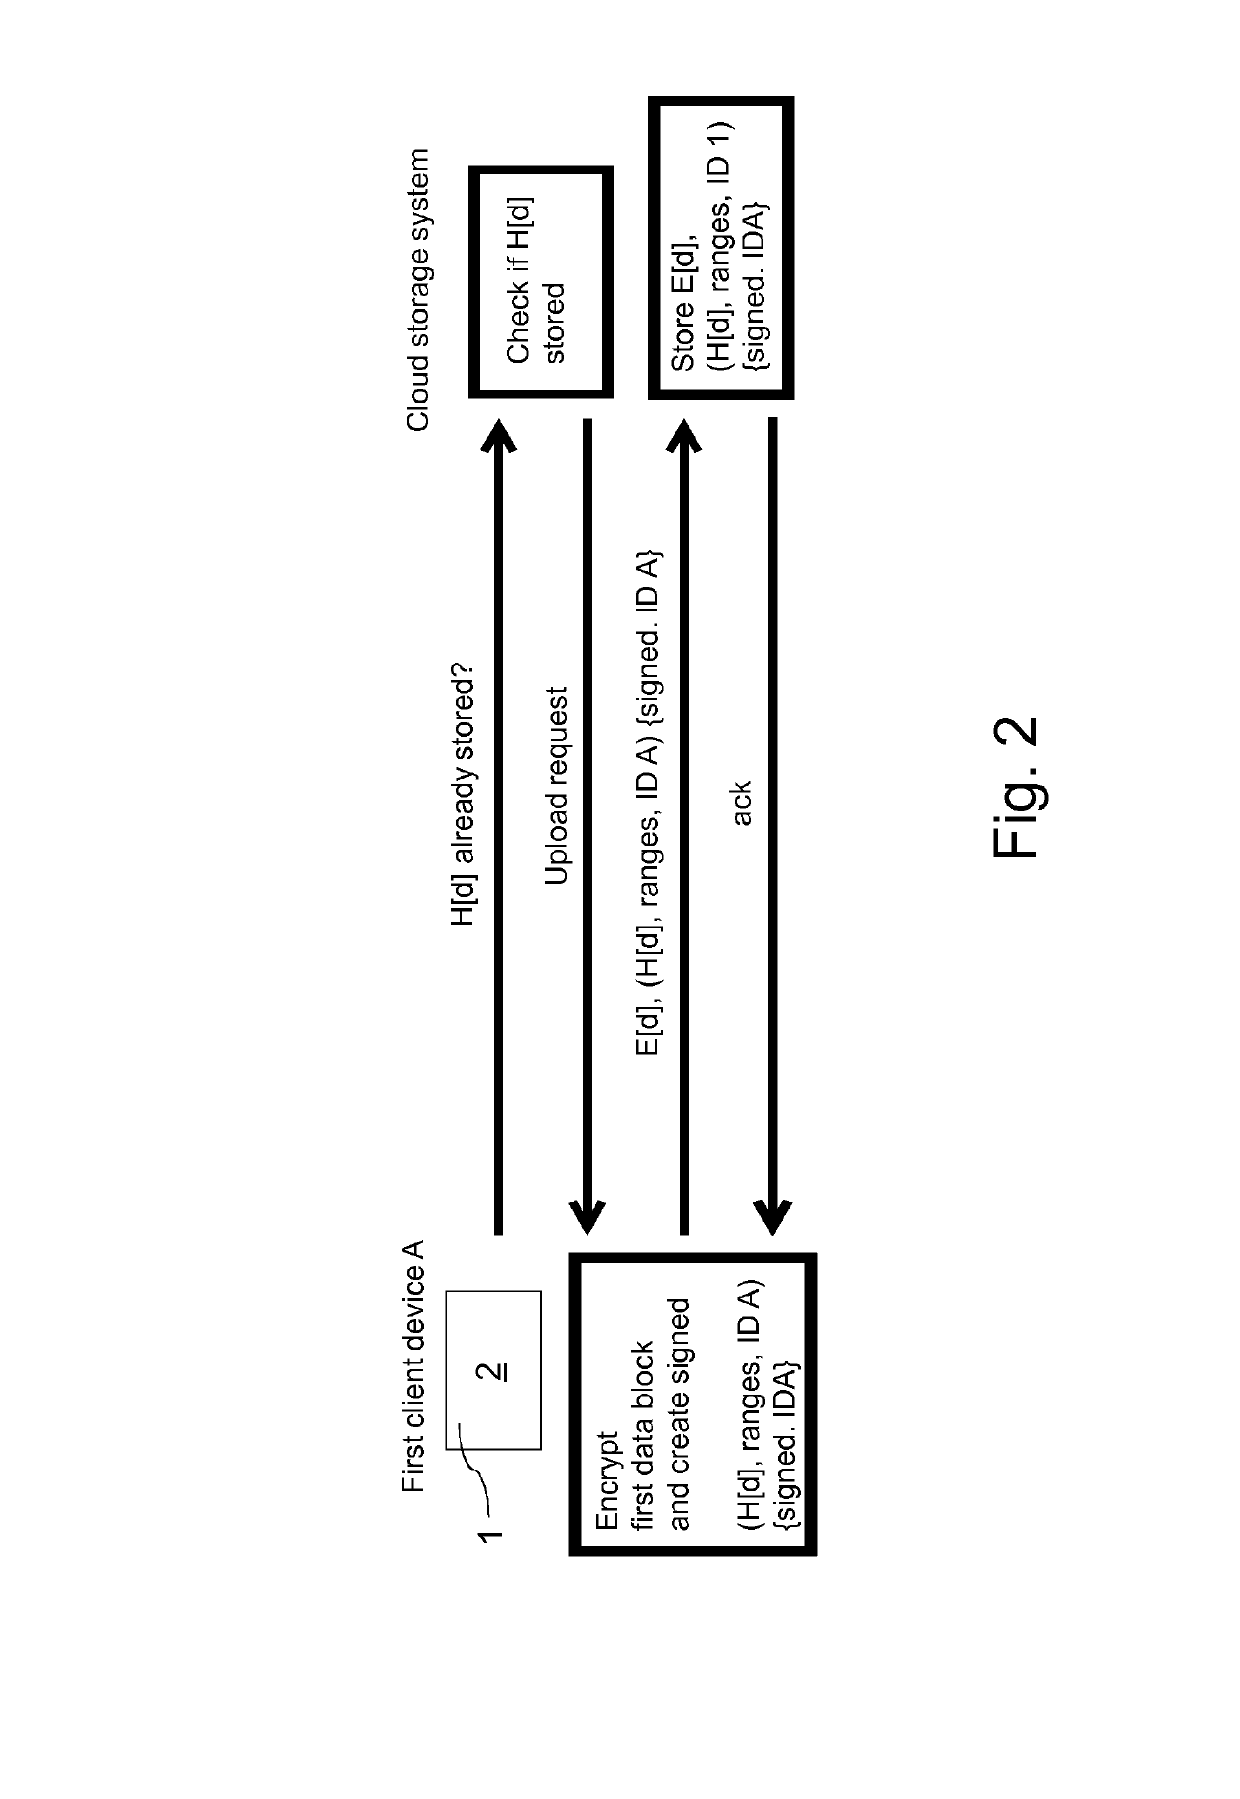 Method for storing data blocks from client devices to a cloud storage system